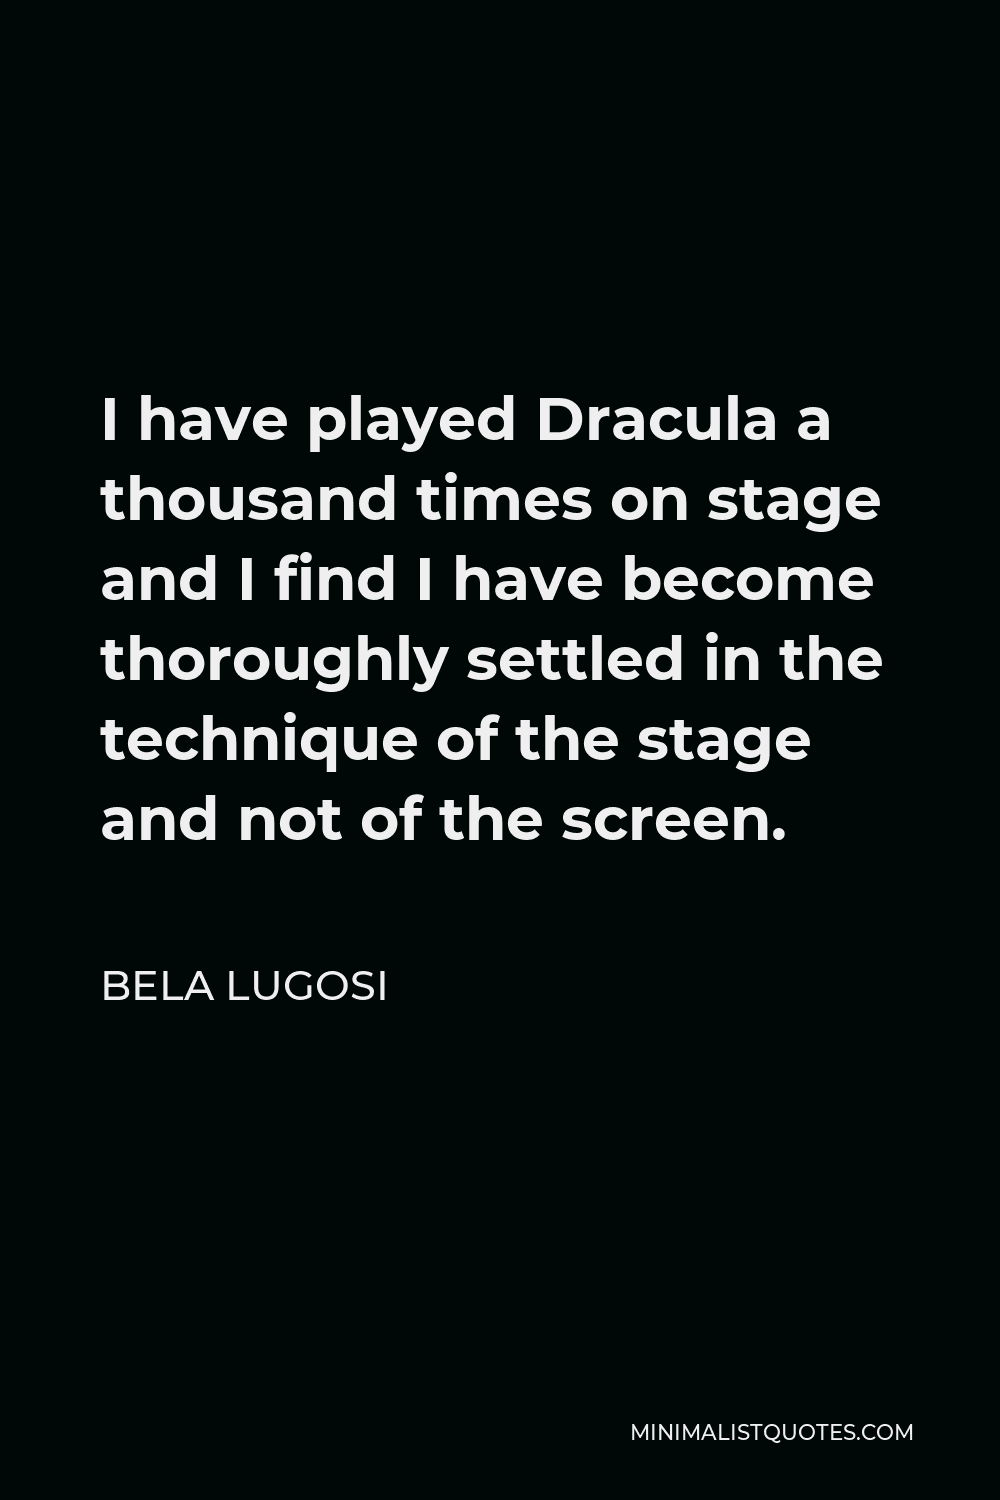 Bela Lugosi Quote - I have played Dracula a thousand times on stage and I find I have become thoroughly settled in the technique of the stage and not of the screen.